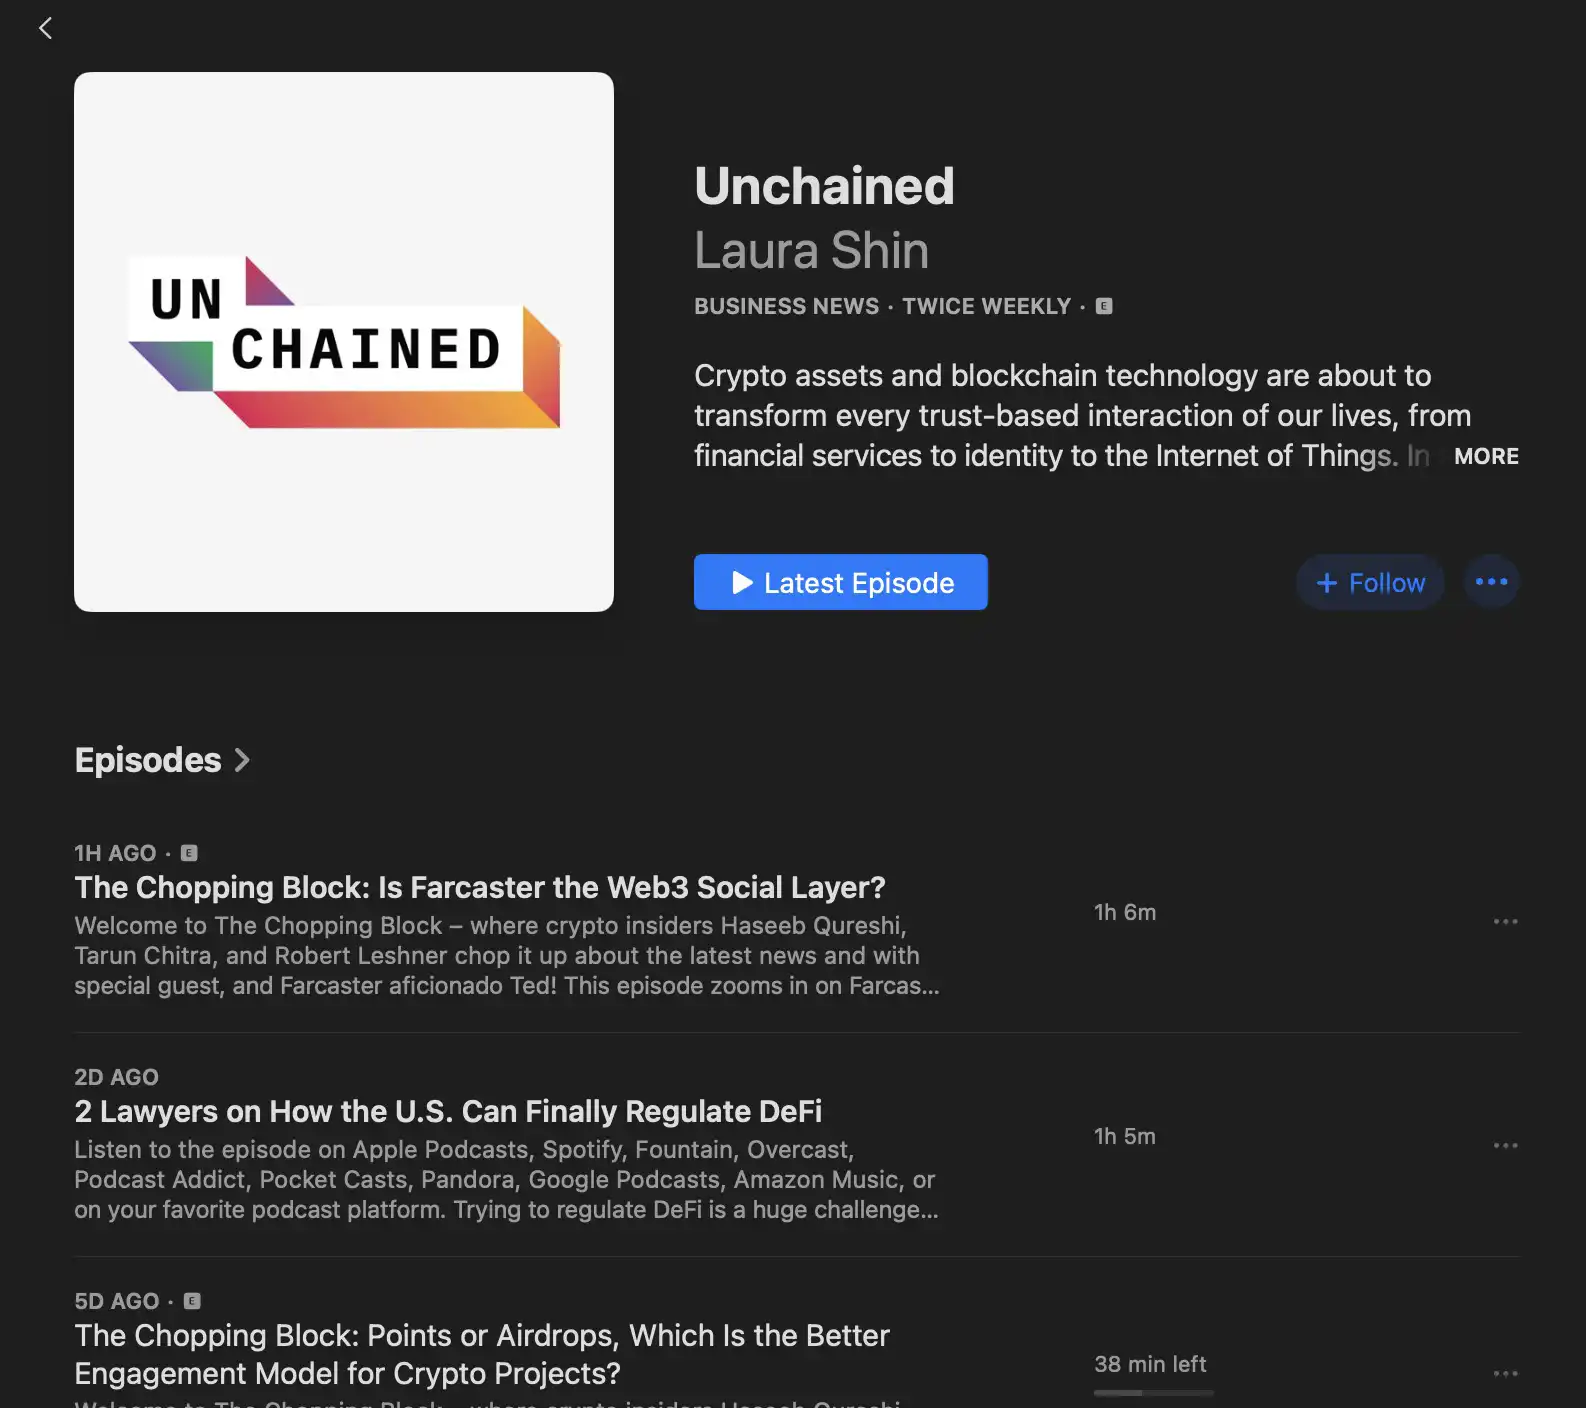 Unchained by Laura Shin Podcast